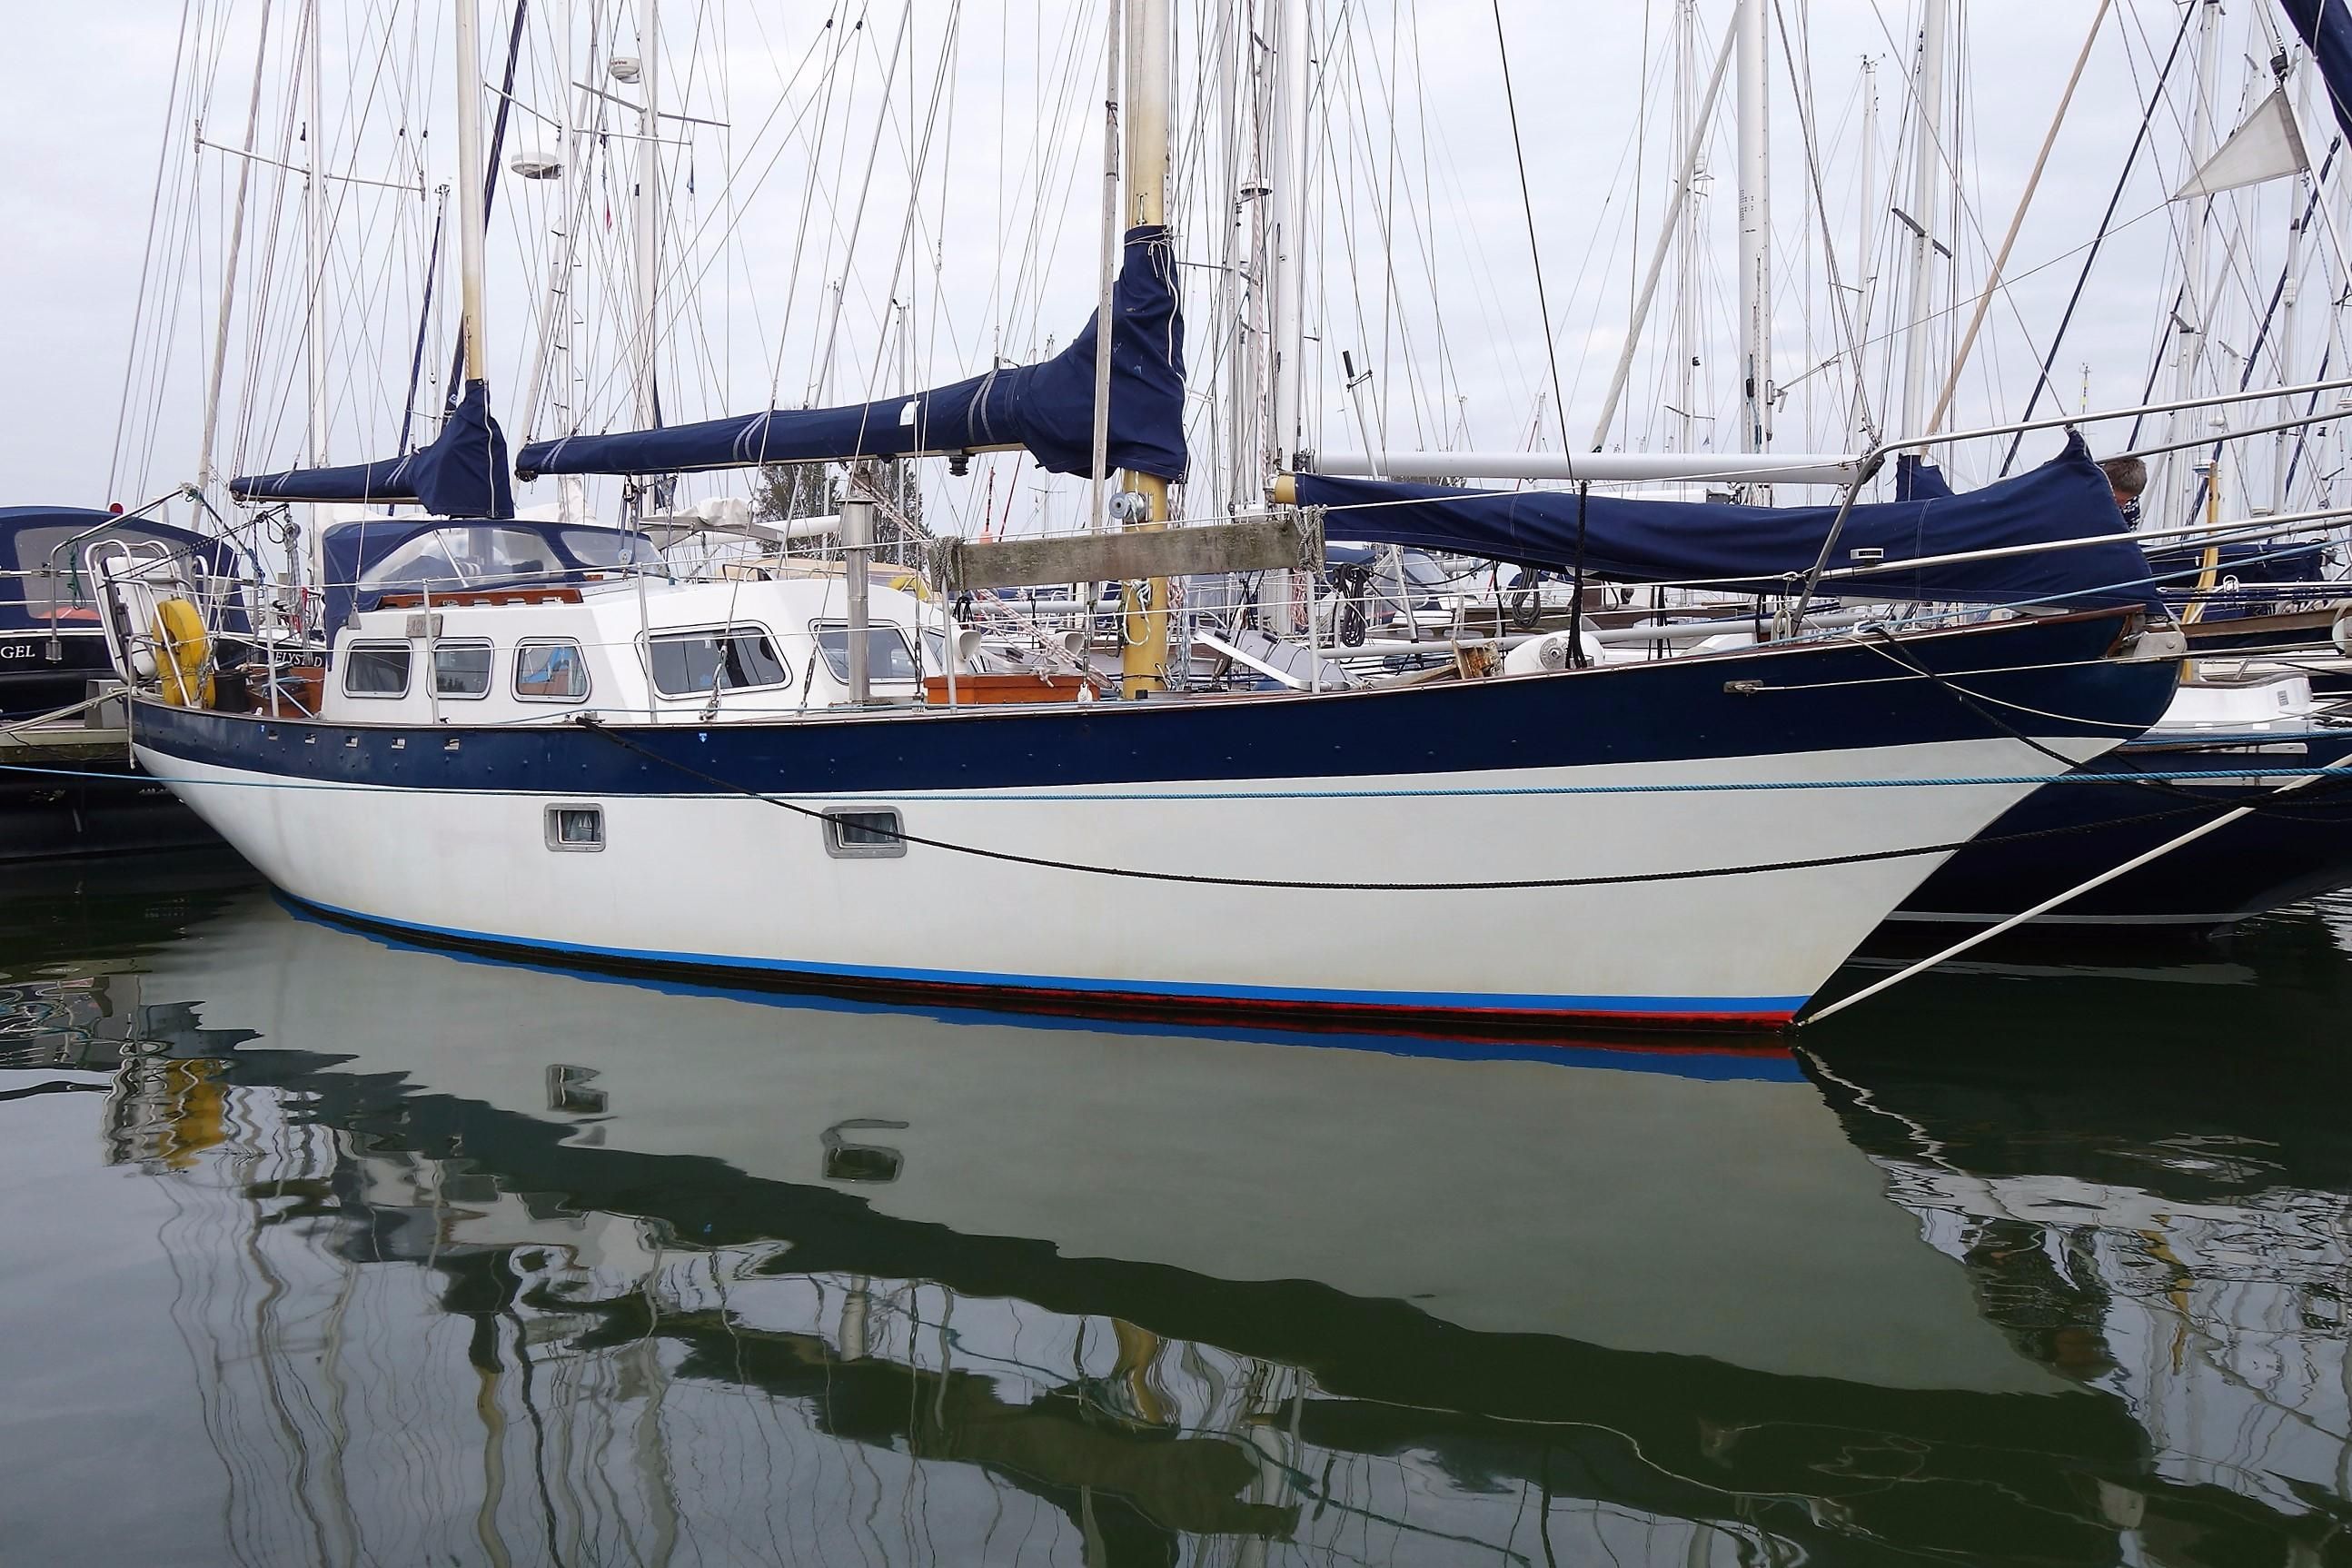 35 ft sailboat for sale